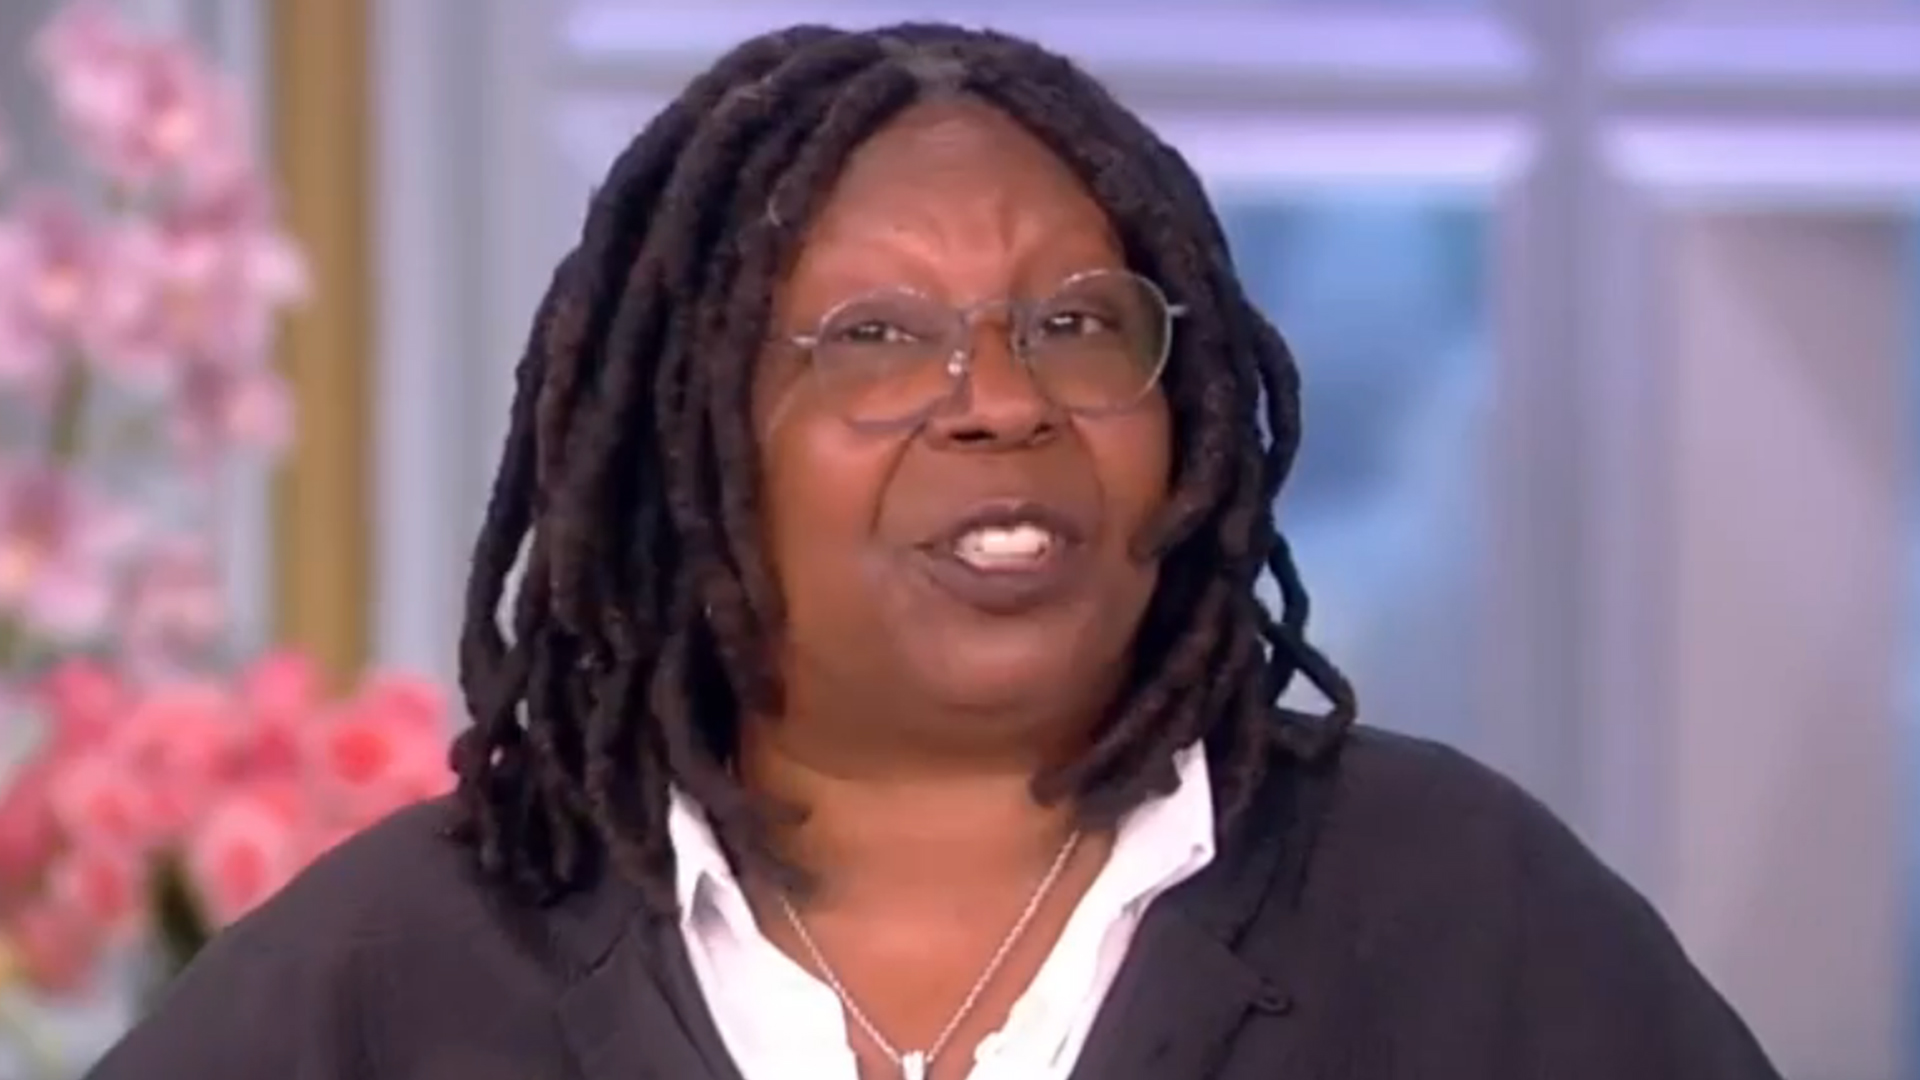 The View fans vow to boycott show after Whoopi Goldberg's 'disturbing' behavior live on air